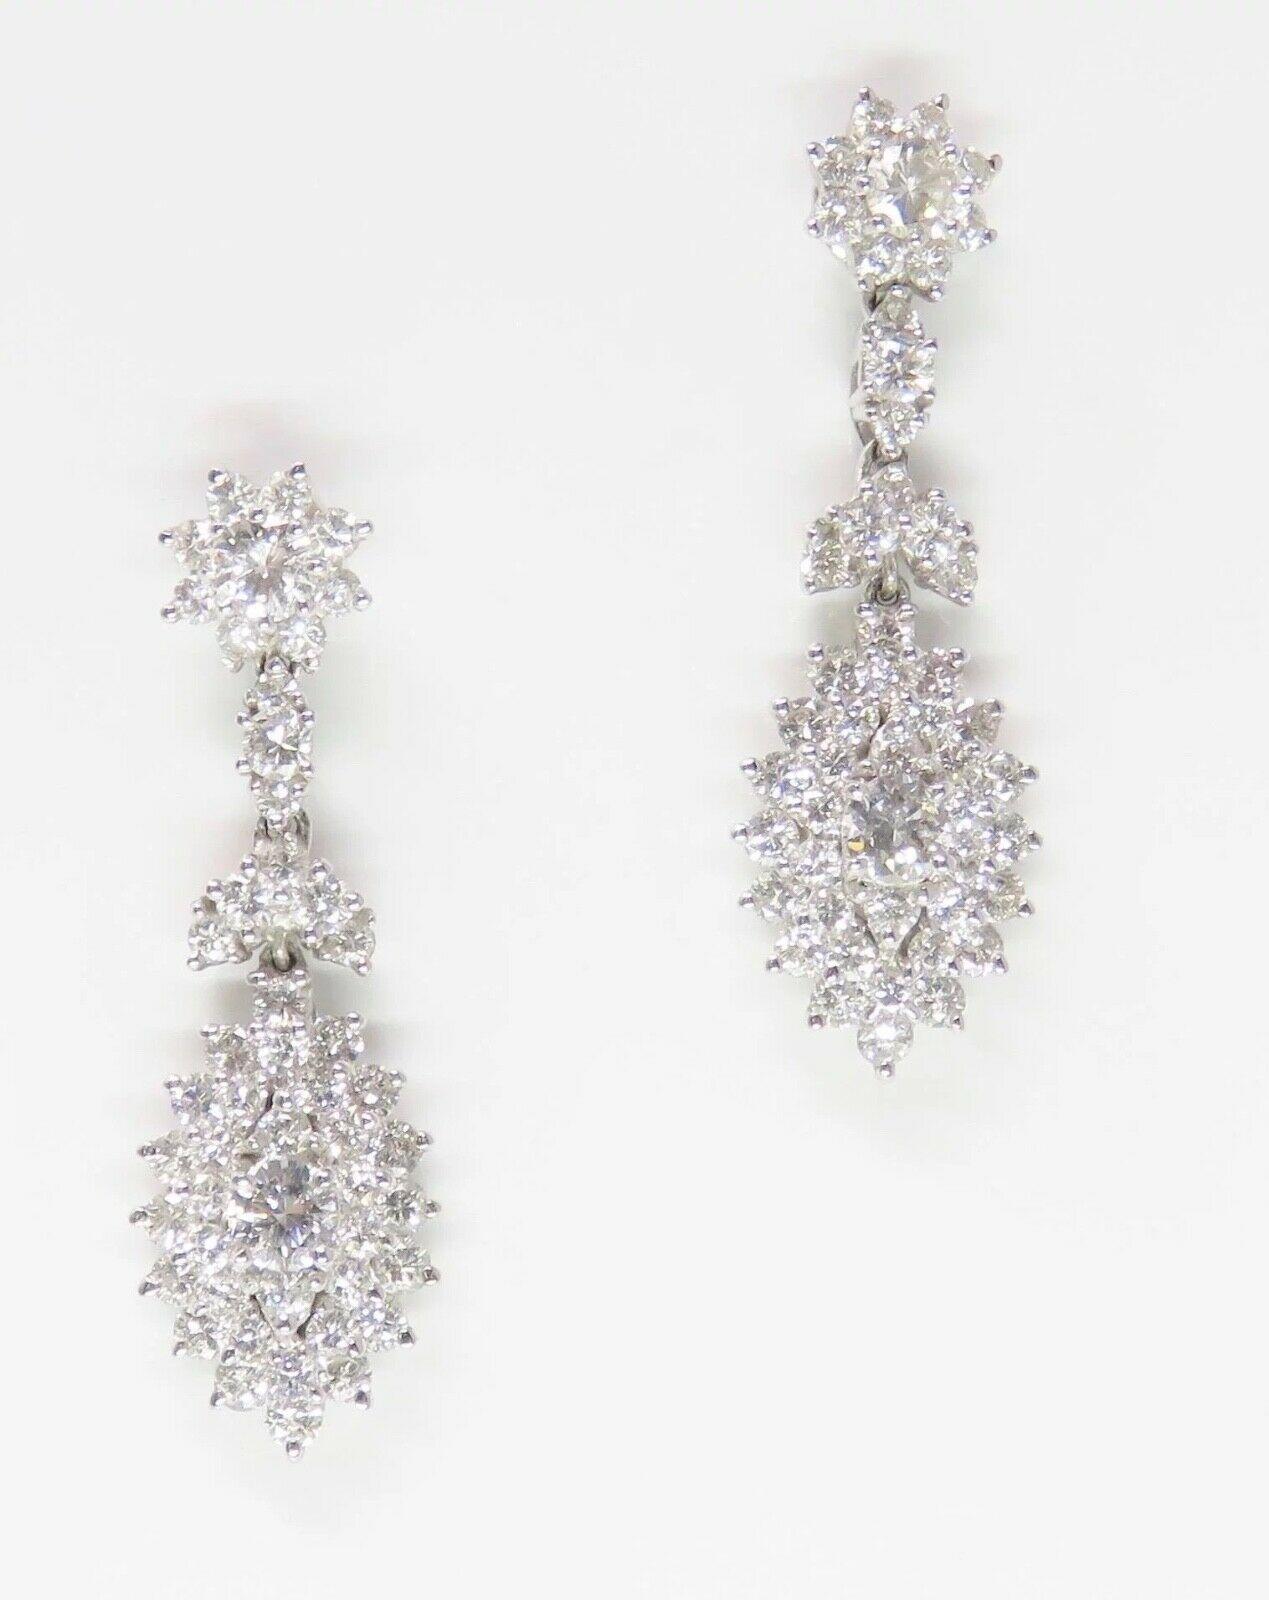 Impressive 14k Gold 4.00 Carat F VS Diamond Dangle Drop Pendant Earrings

These stunning earrings are set with a total of 100 diamonds (tested and are natural), totaling approximately 4.00 carats total weight. The 4 center diamonds are approximately